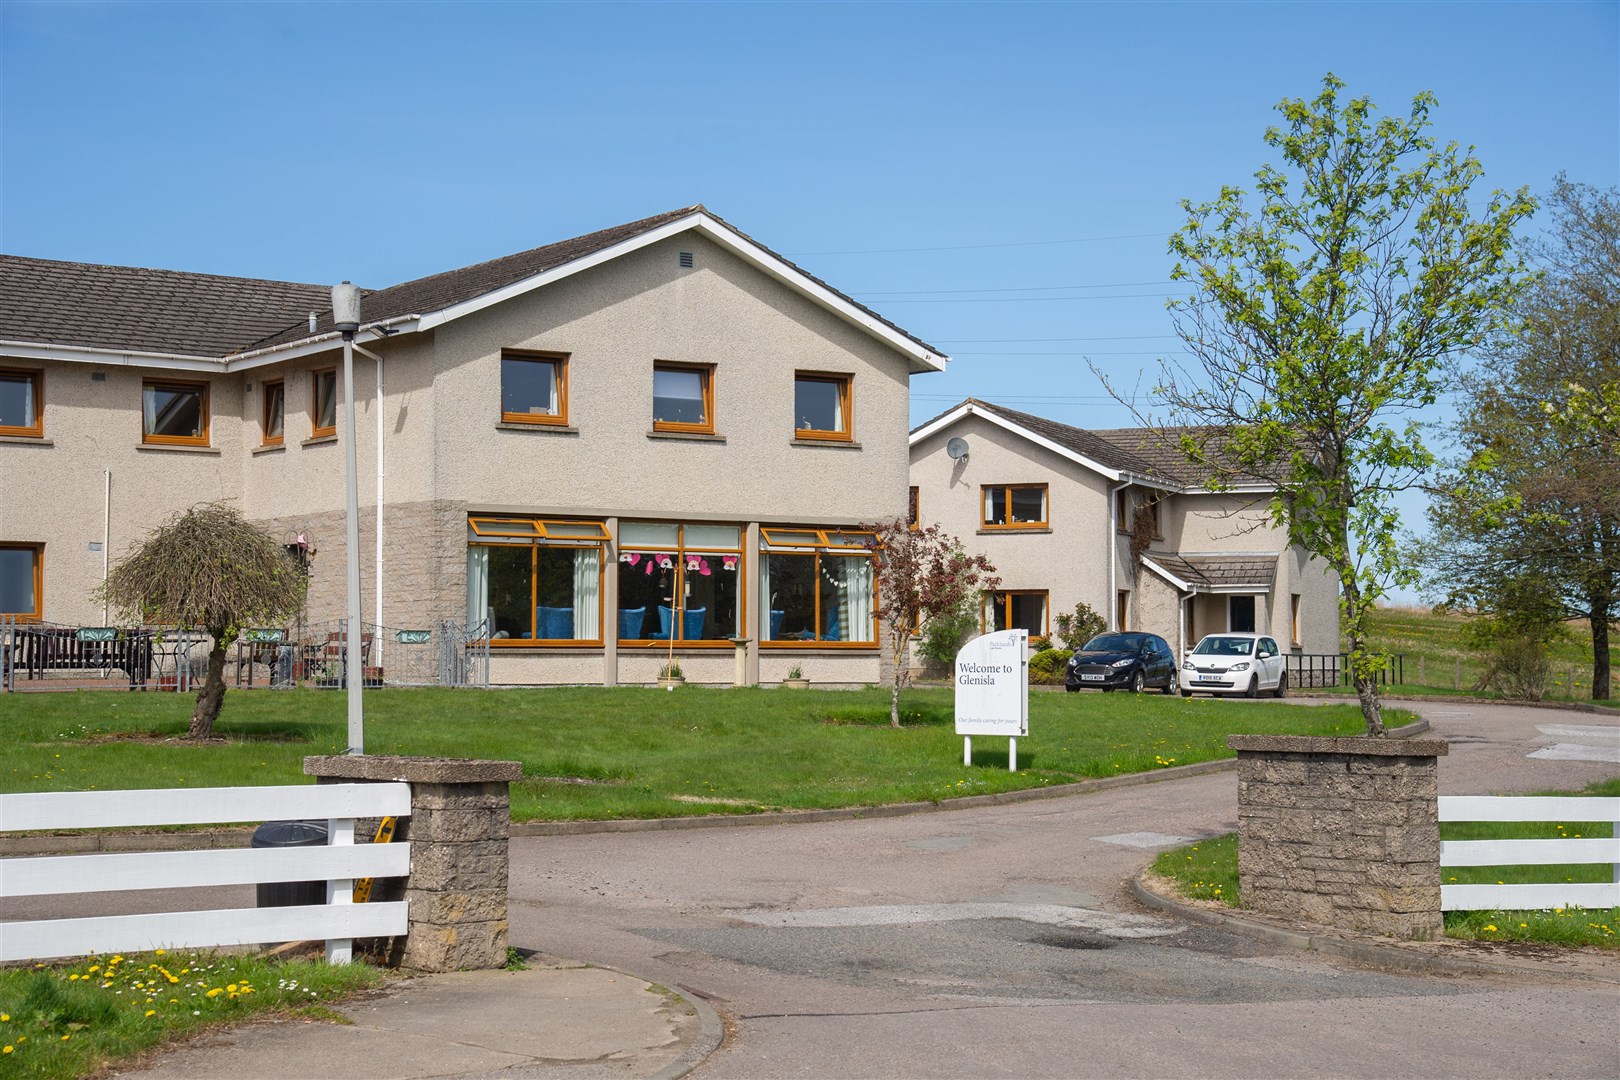 Glenisla Care Home in Keith is part of the Parklands group of homes across Moray and the north.